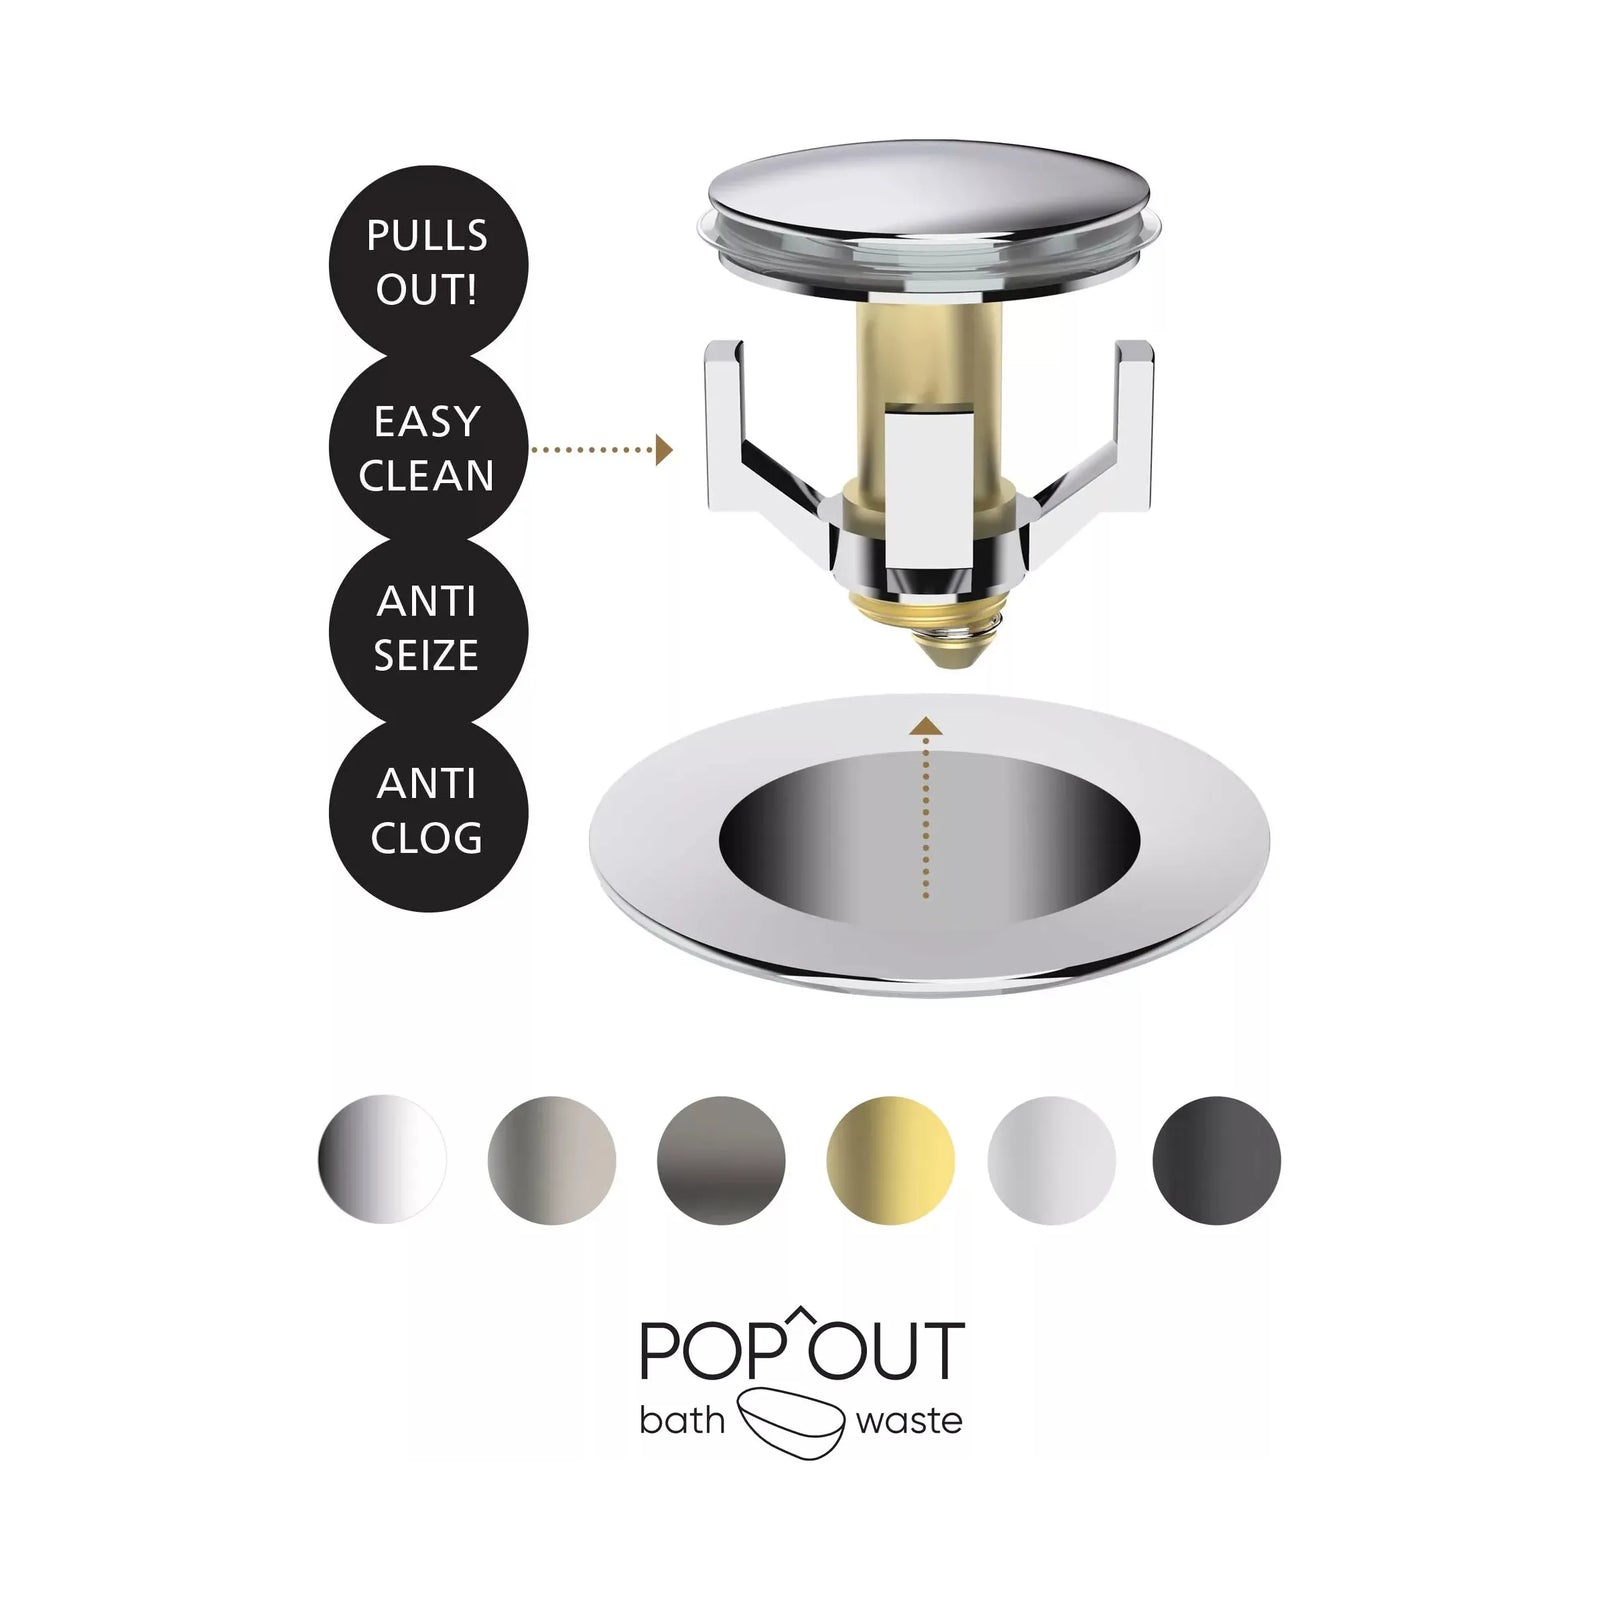 Pop-out Bath Waste – for non-overflow baths